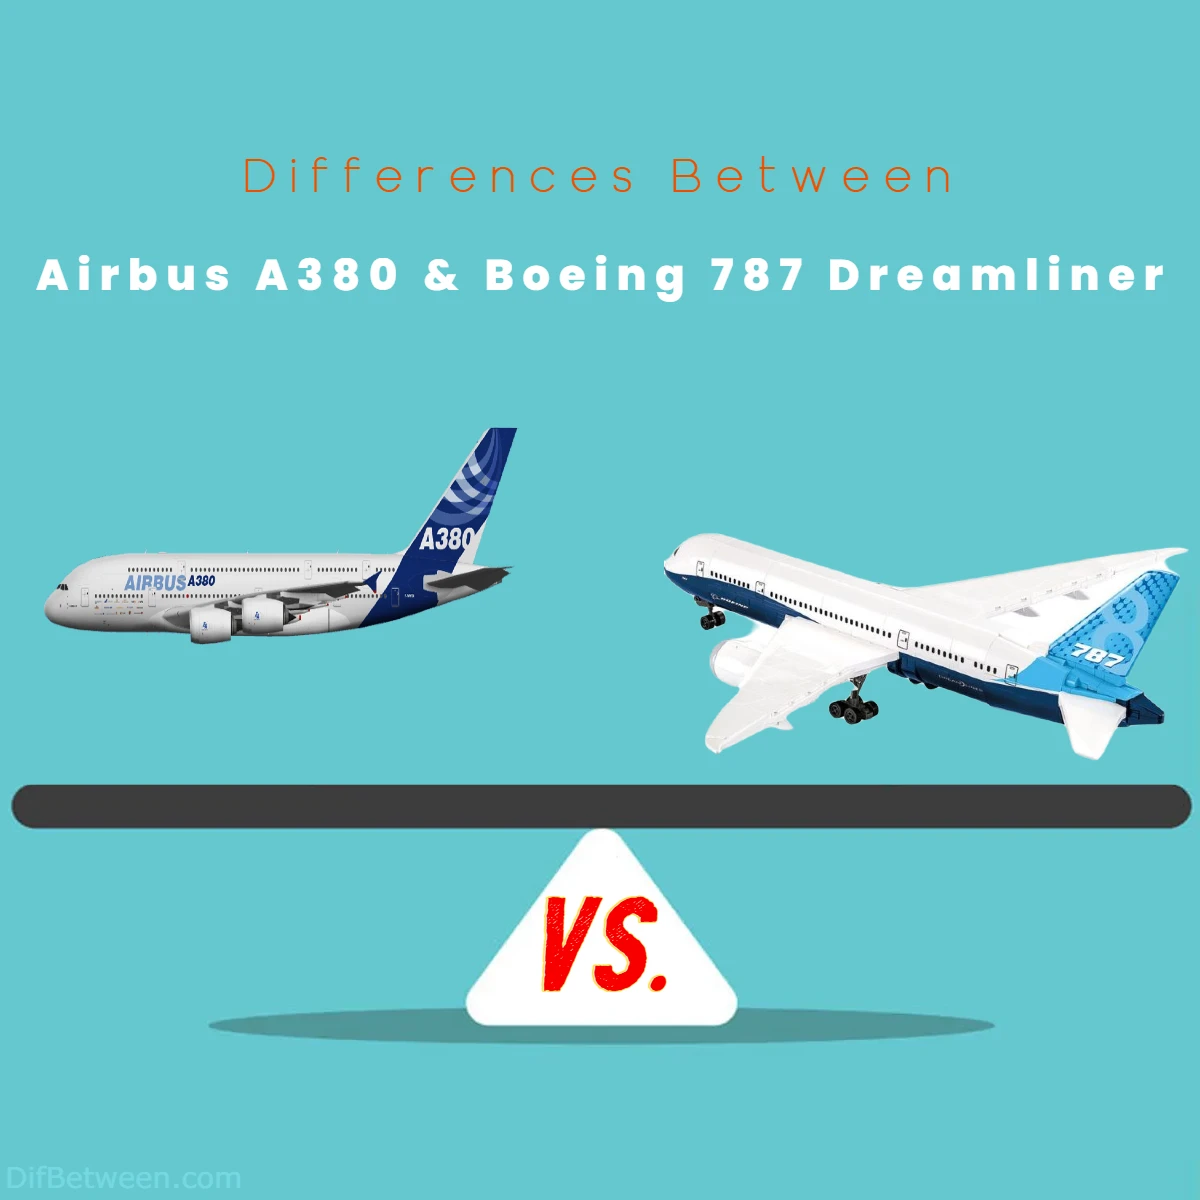 Differences Between Boeing 787 Dreamliner and Airbus A380